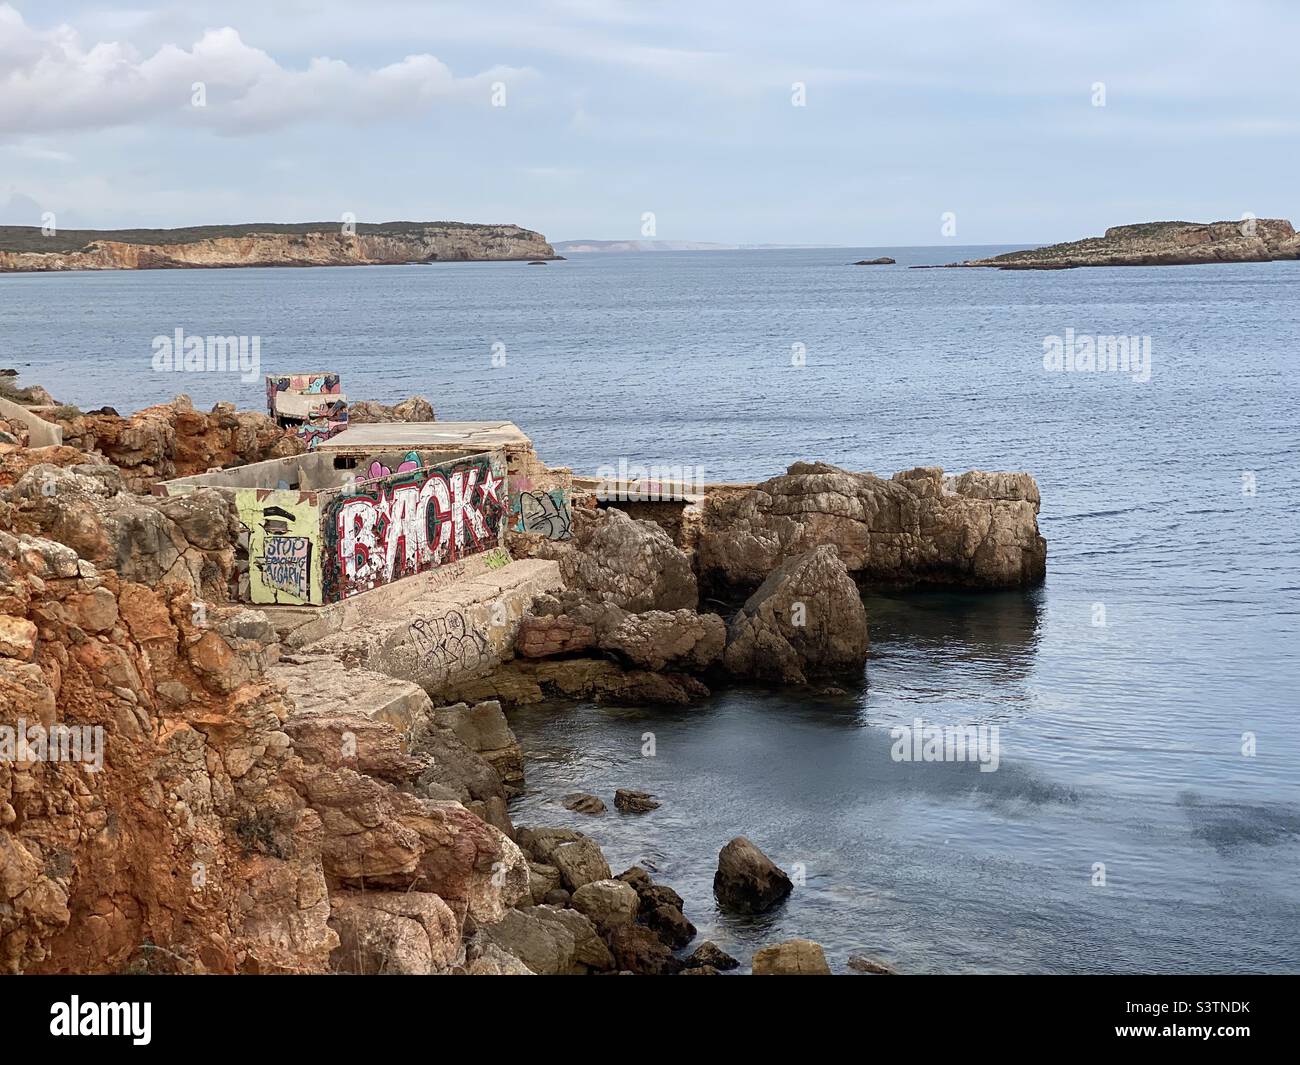 Abandoned building covered in graffiti on the coast near Sagres, Portugal Stock Photo